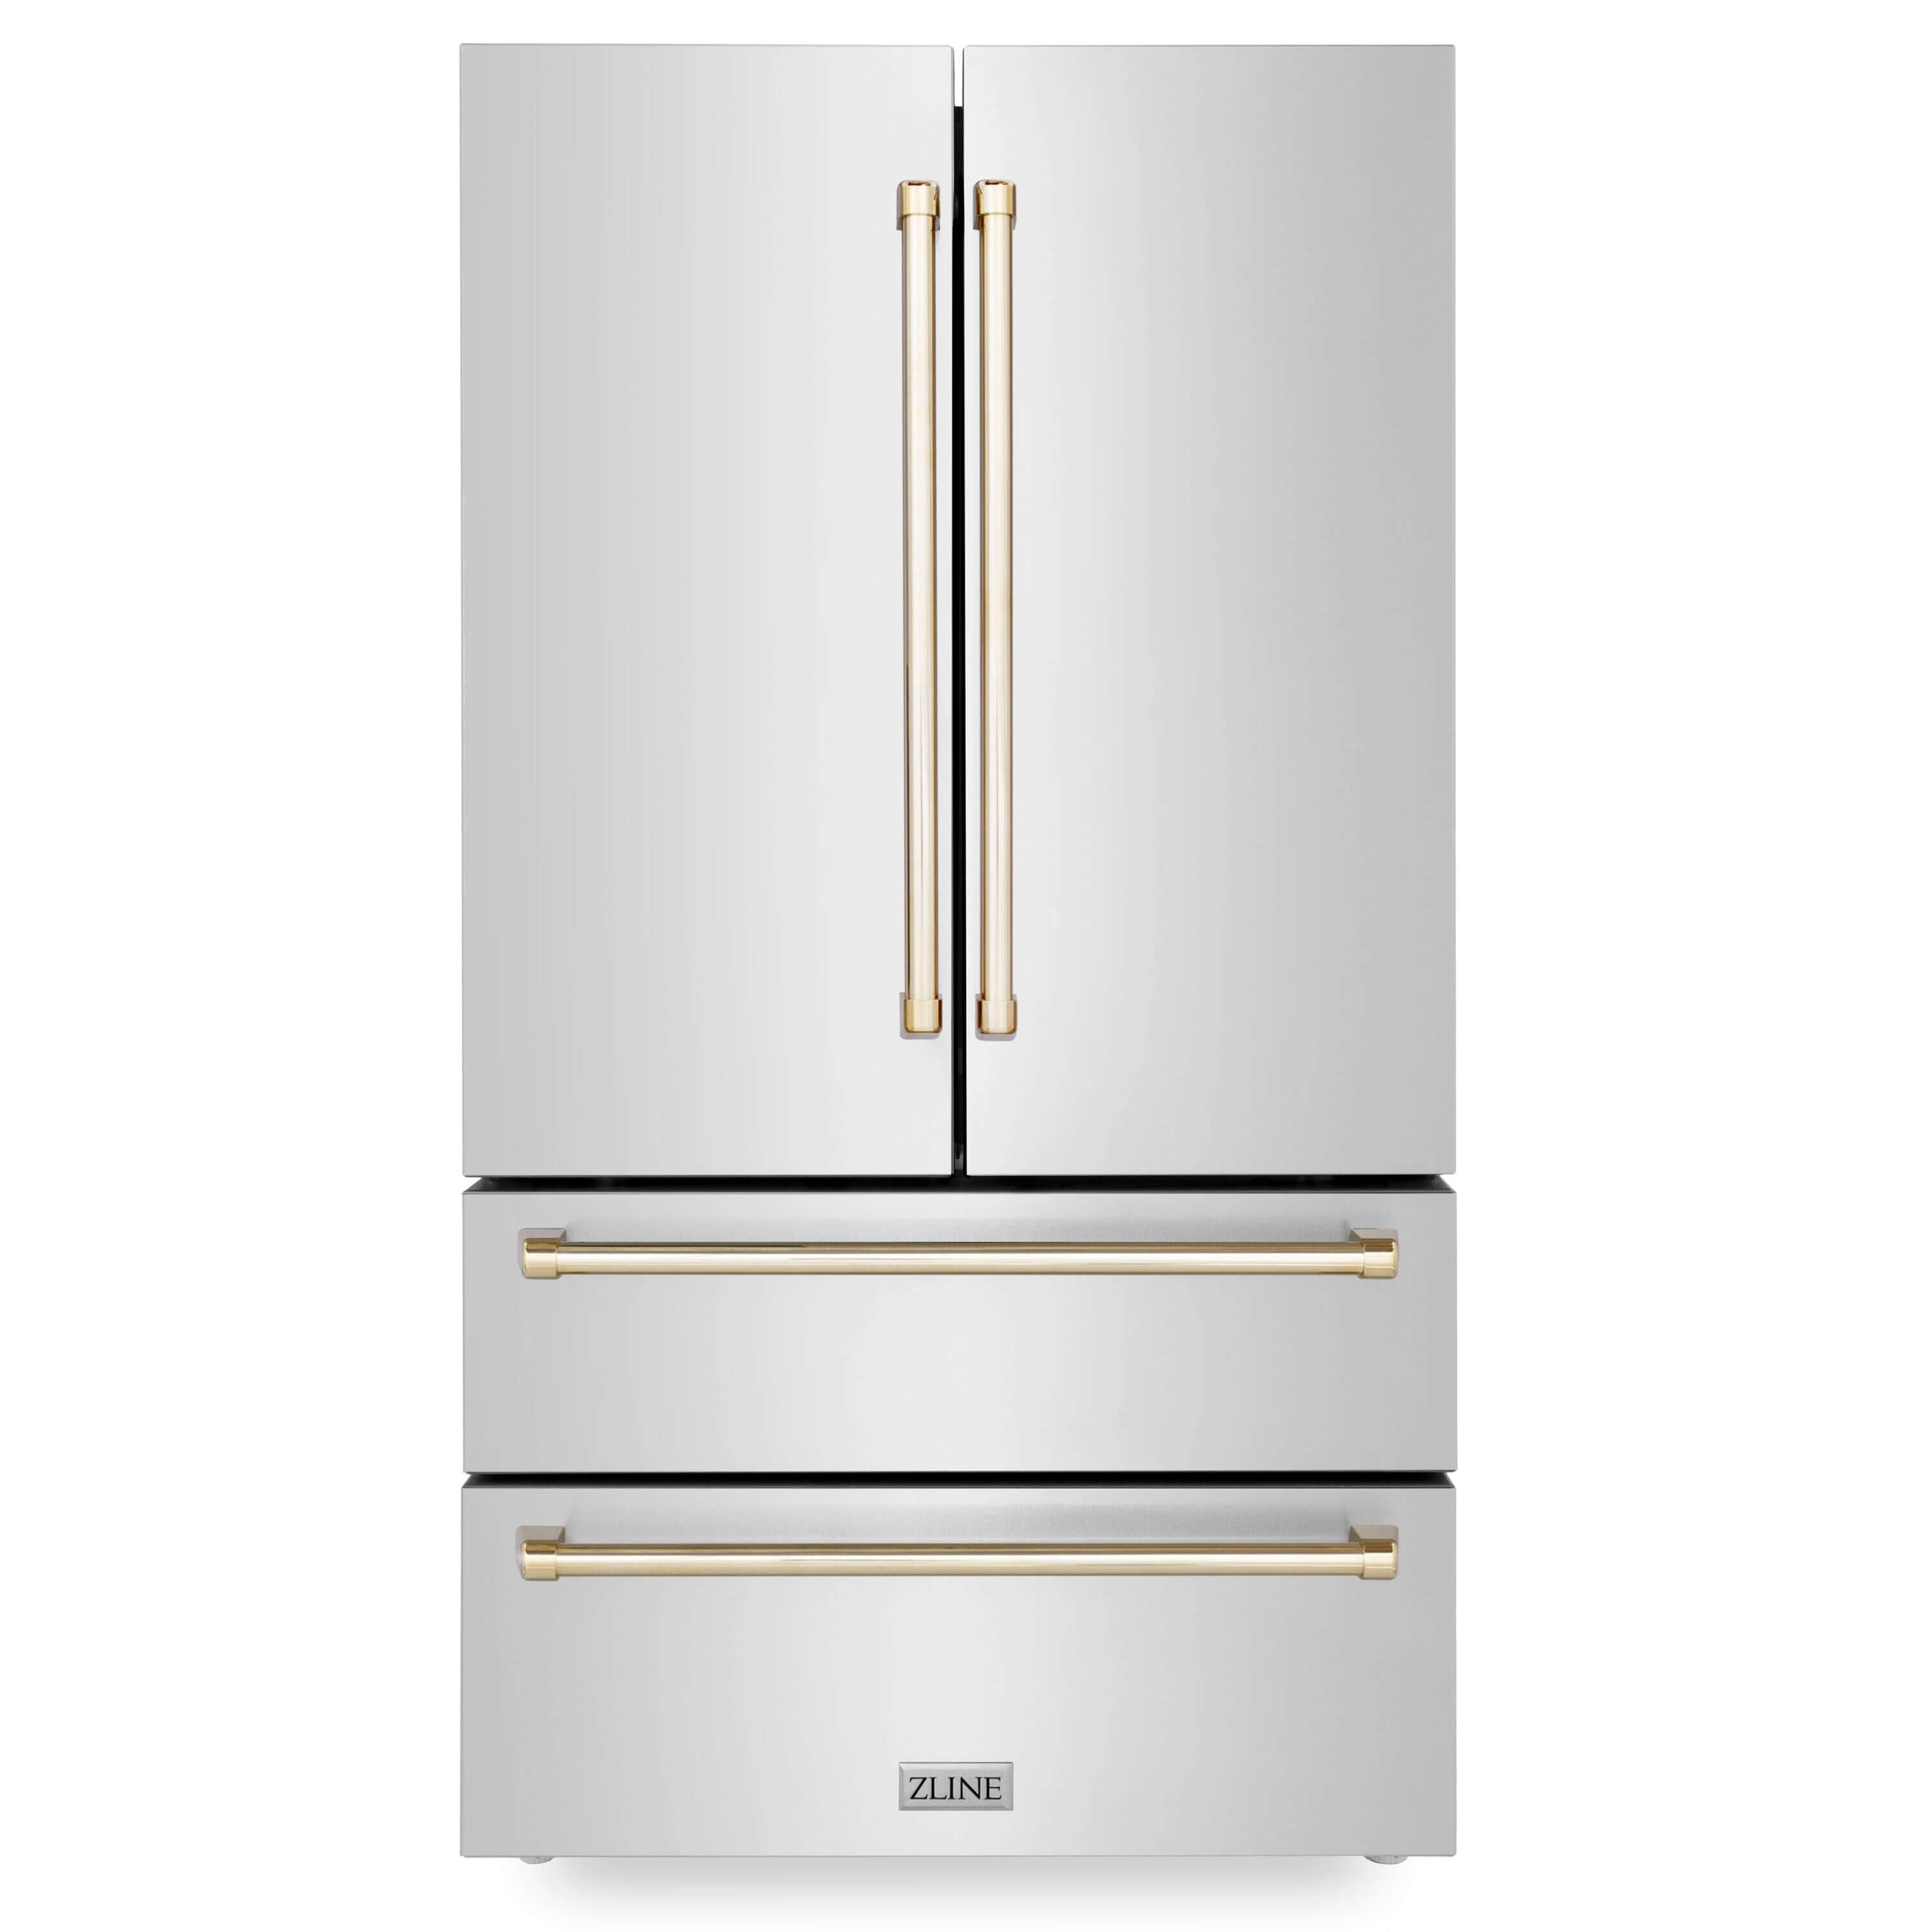 ZLINE Autograph Edition 36" French Door Refrigerator with Polished Gold accent handles front.